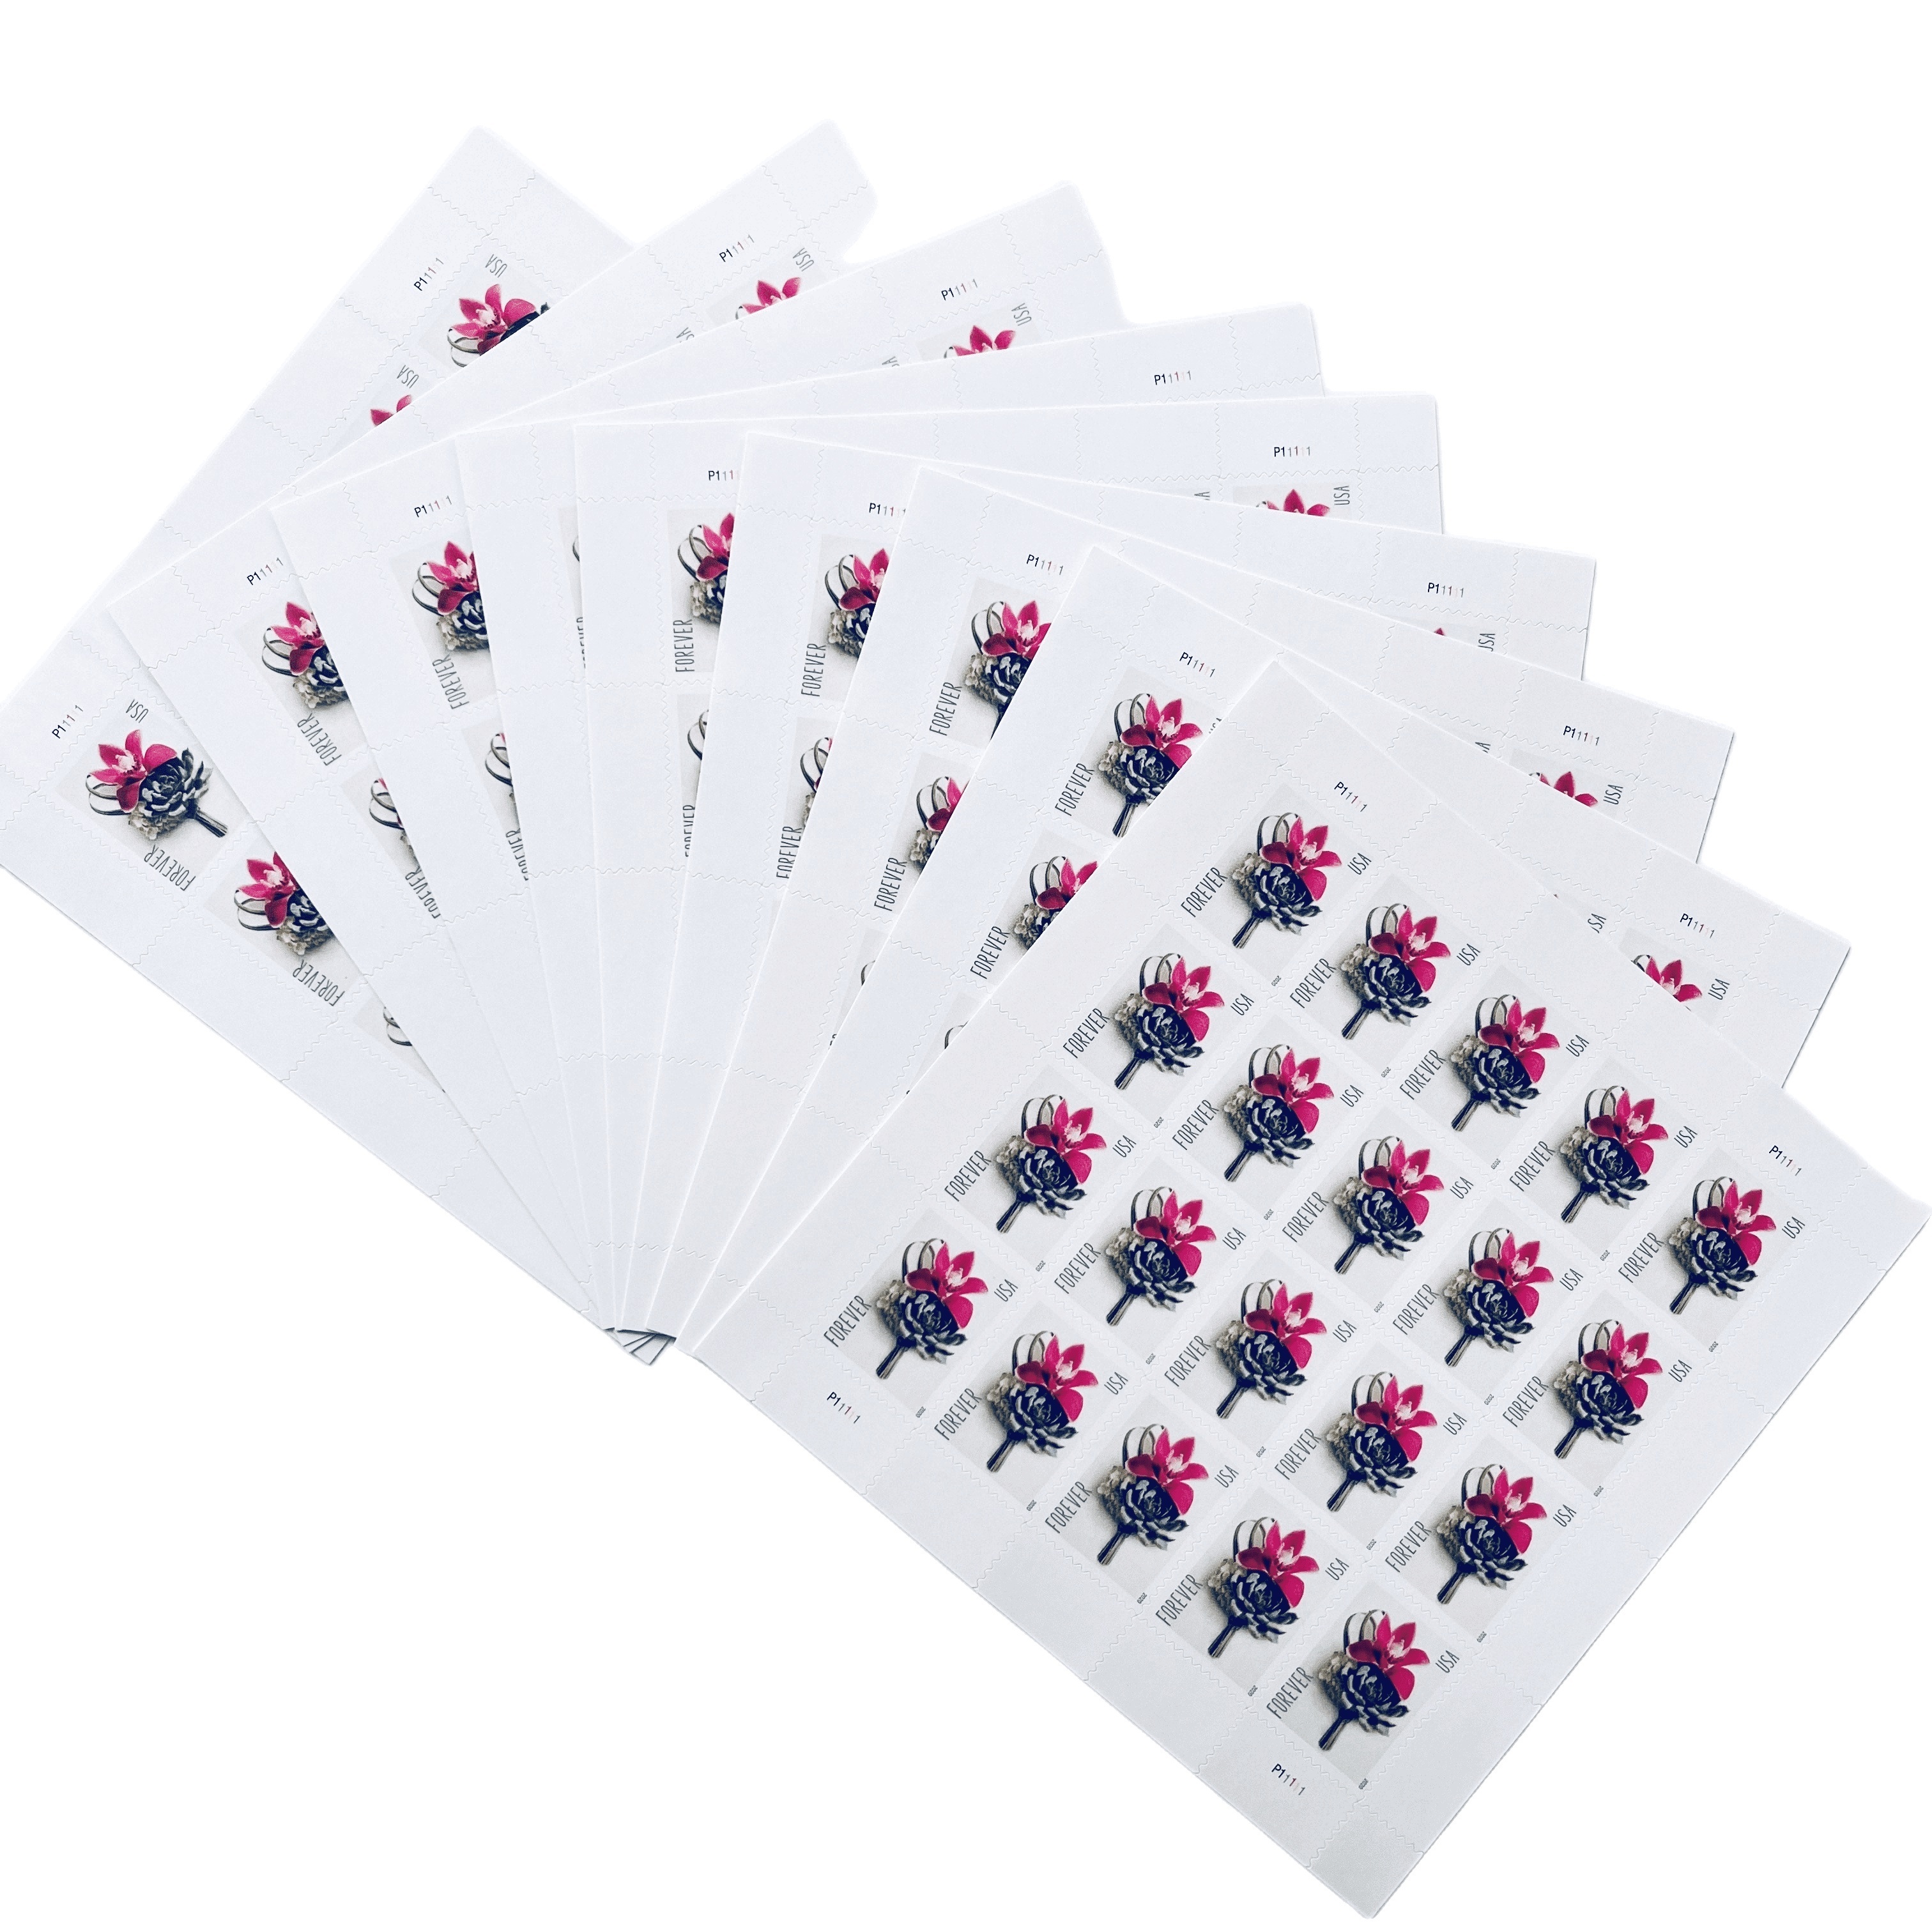 Contemporary Boutonniere Sheet of 20 USPS First Class Forever Postage Stamps Wedding Celebration, White